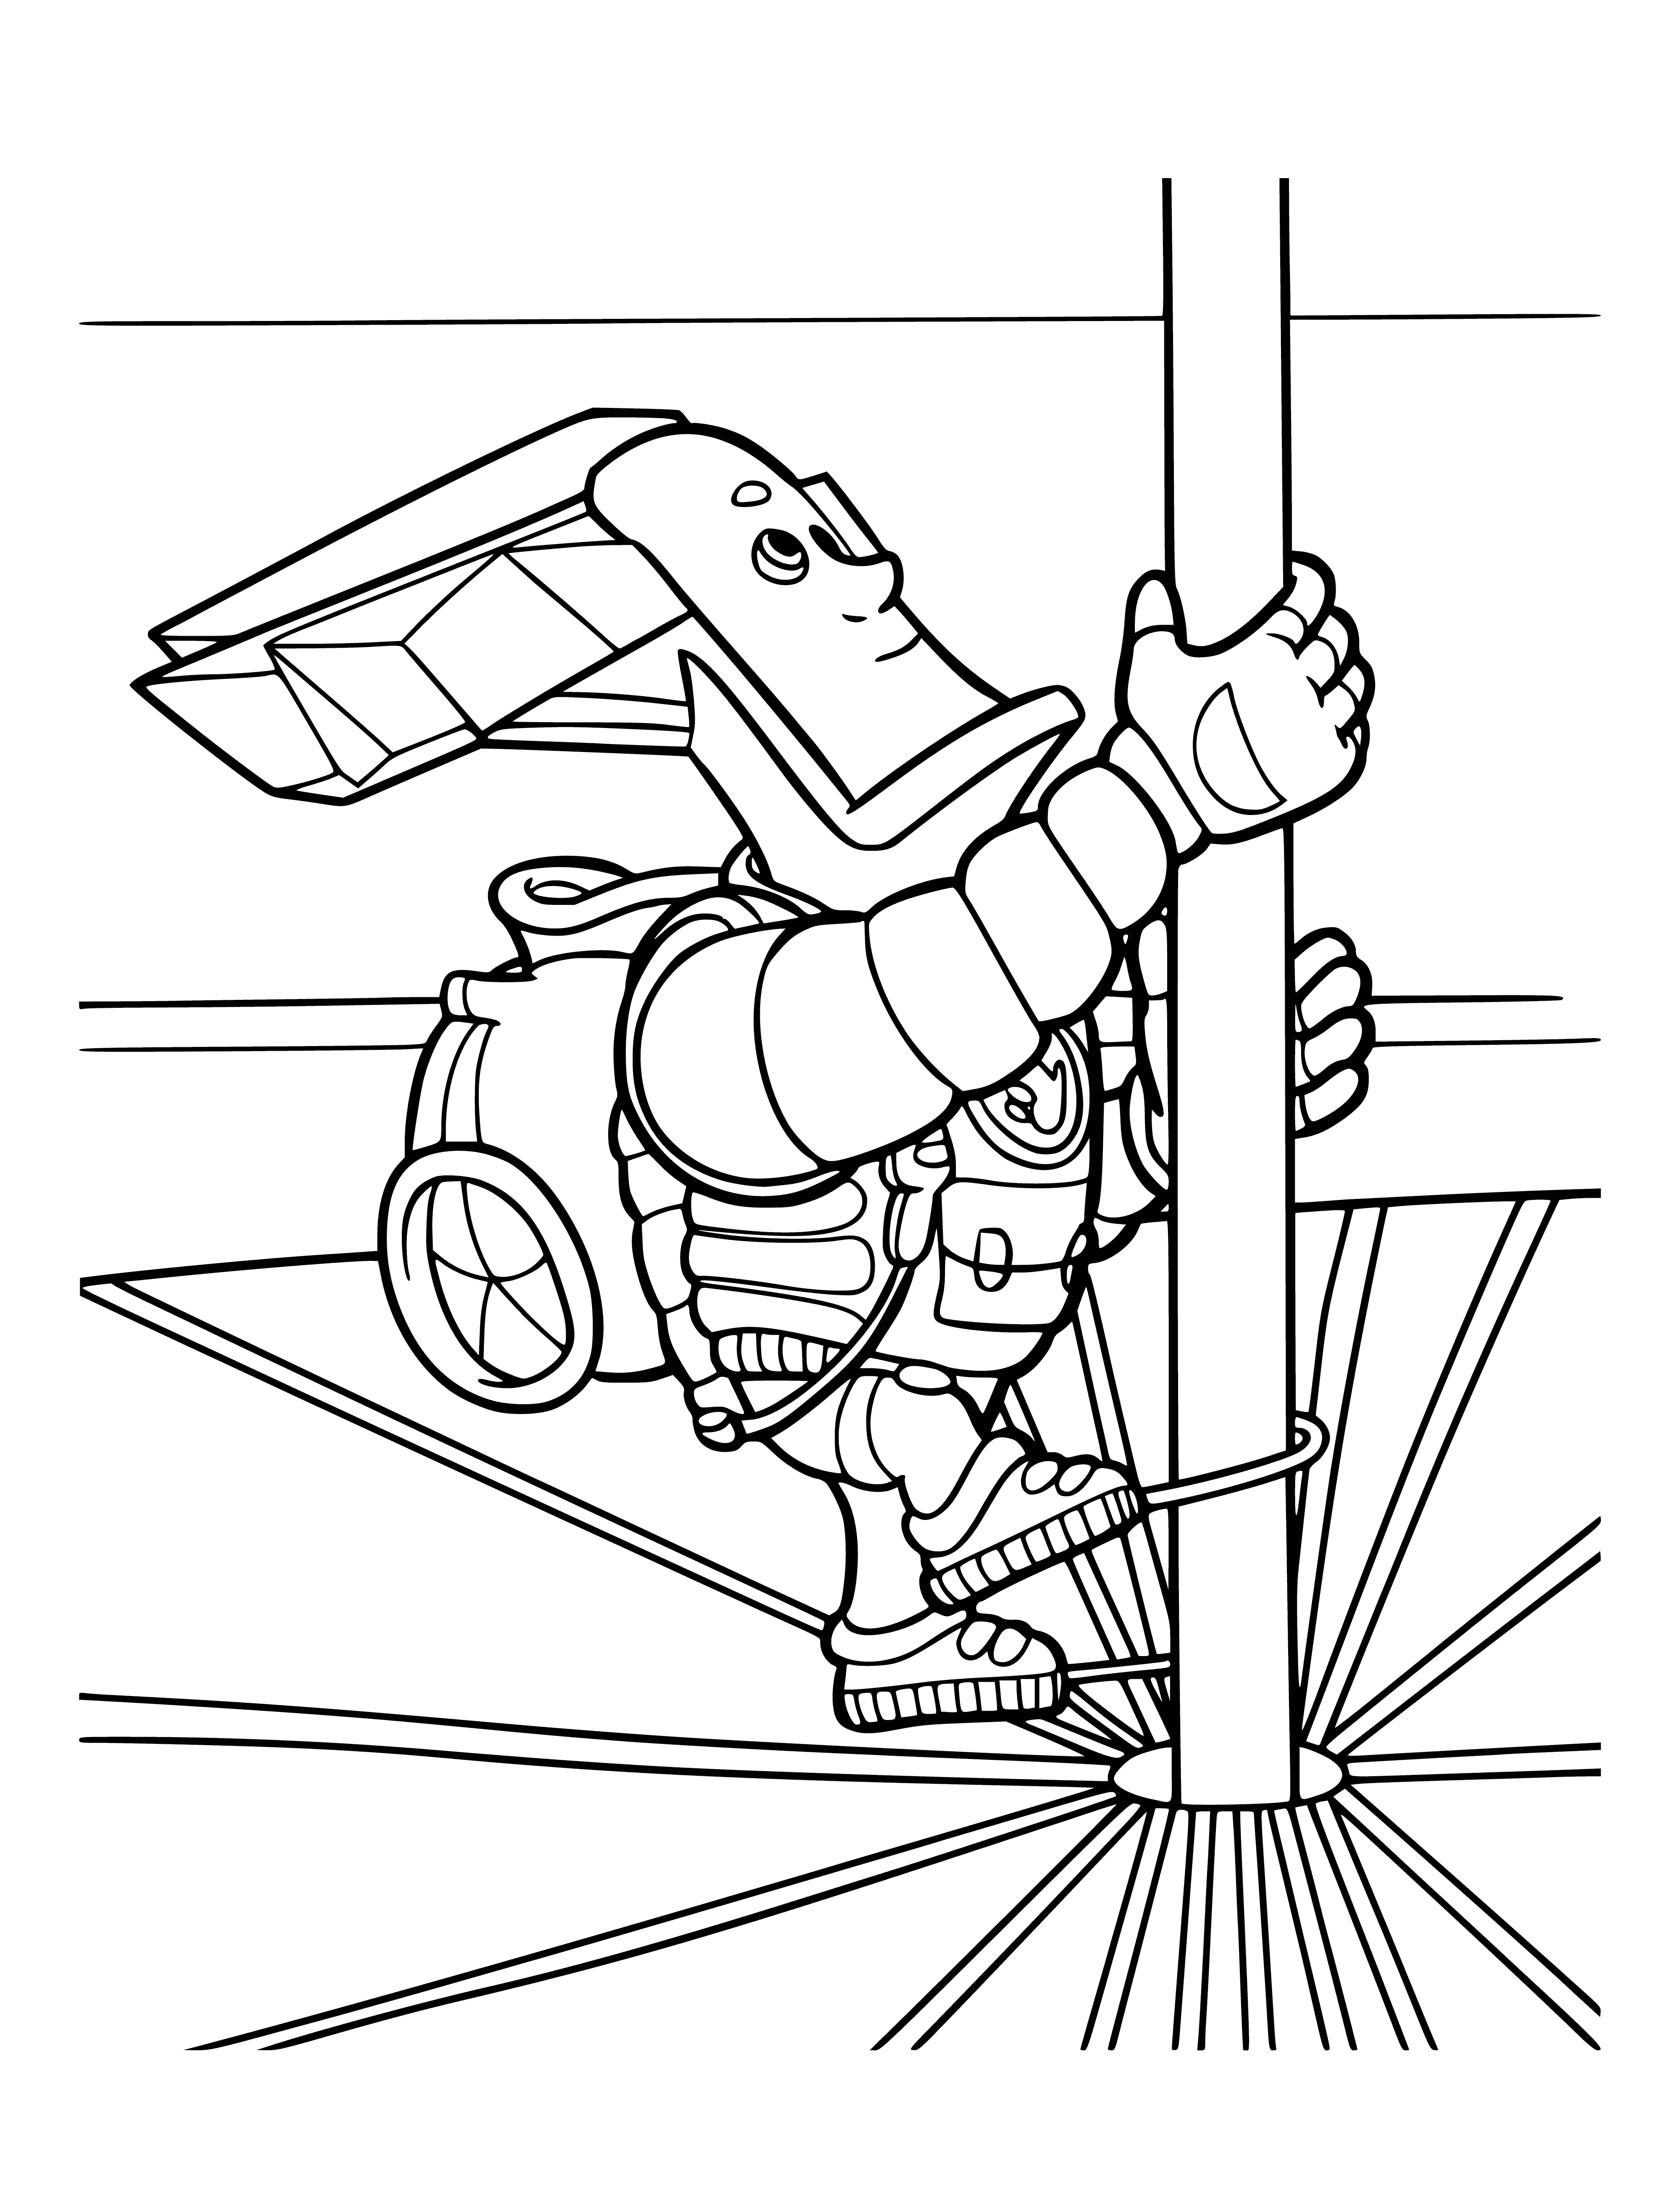 coloring page: The Fixies are on a mission to fix things! Fixik Papus is working hard to make sure everything is in order with his toolbox. He's small, but has a big heart and job to do! #fixies #job #tools